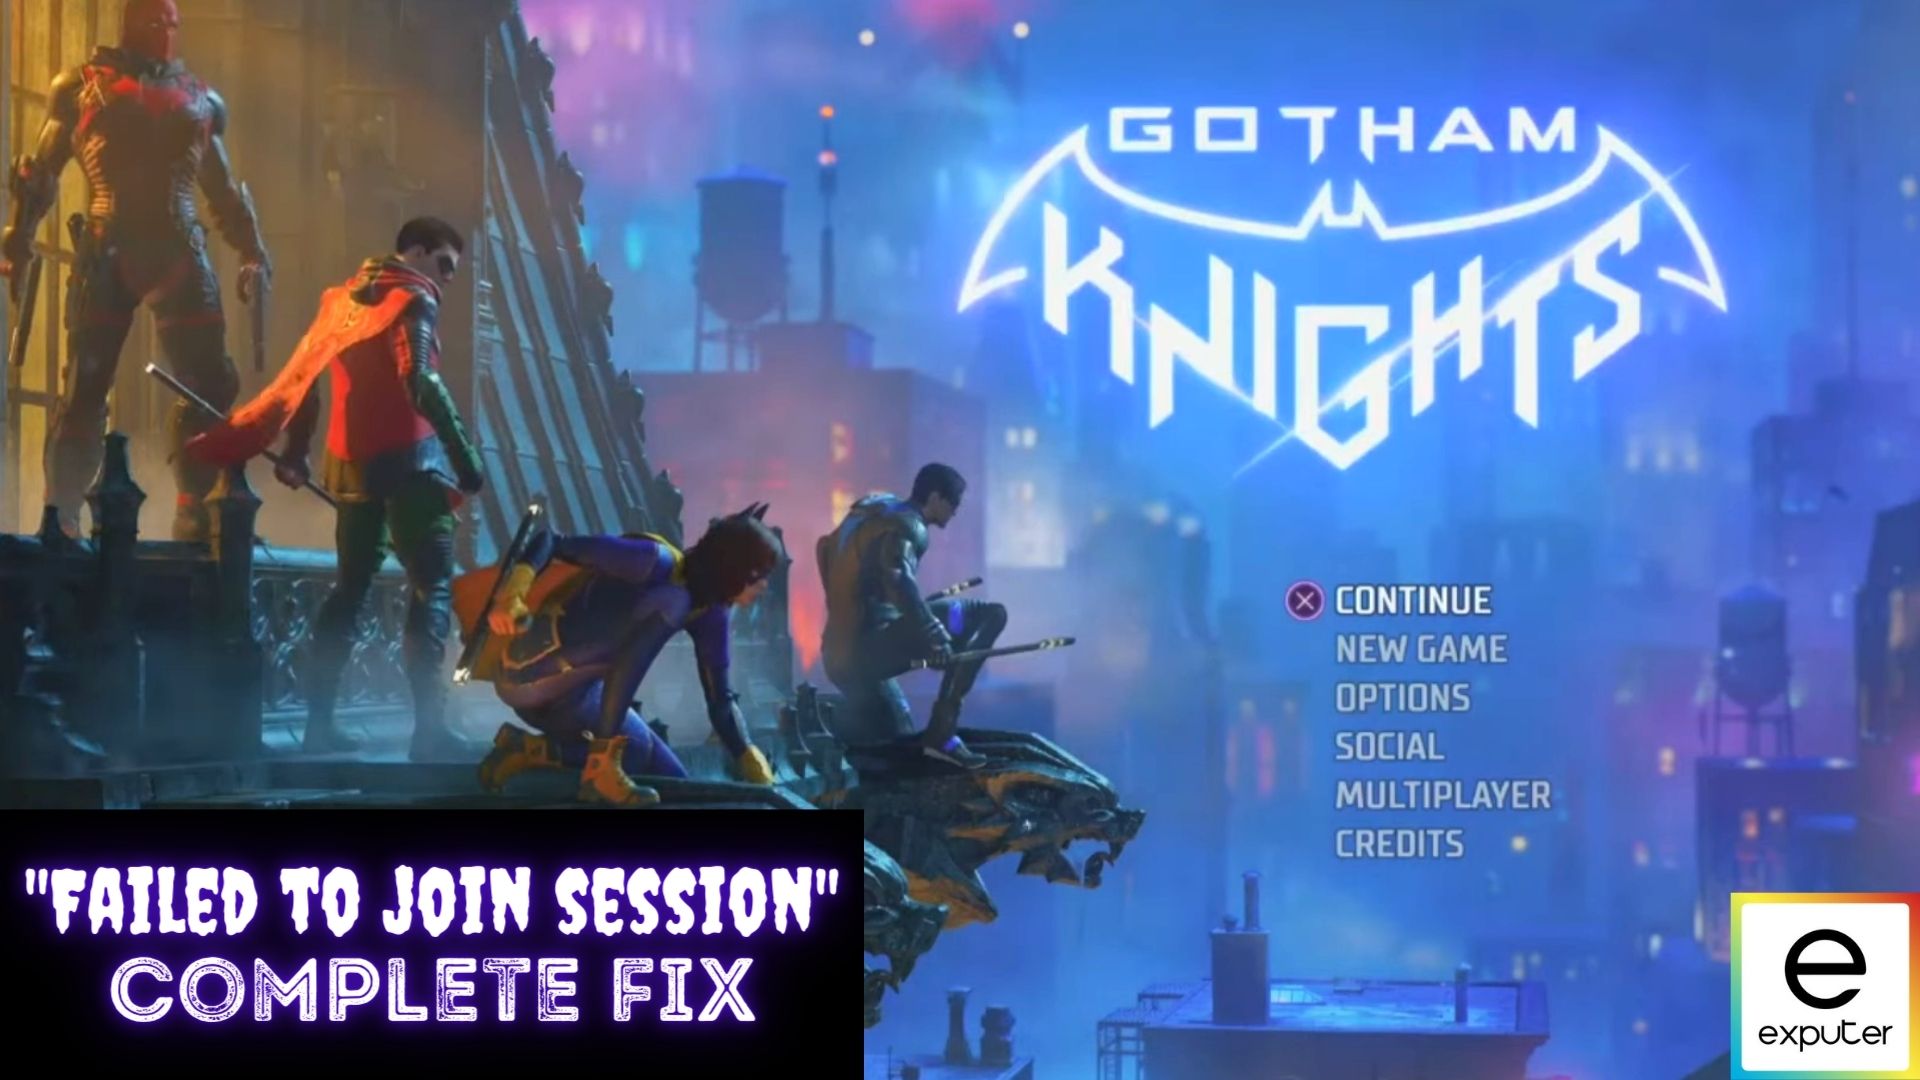 Gotham Knights - The Missed Opportunity of Cross Play